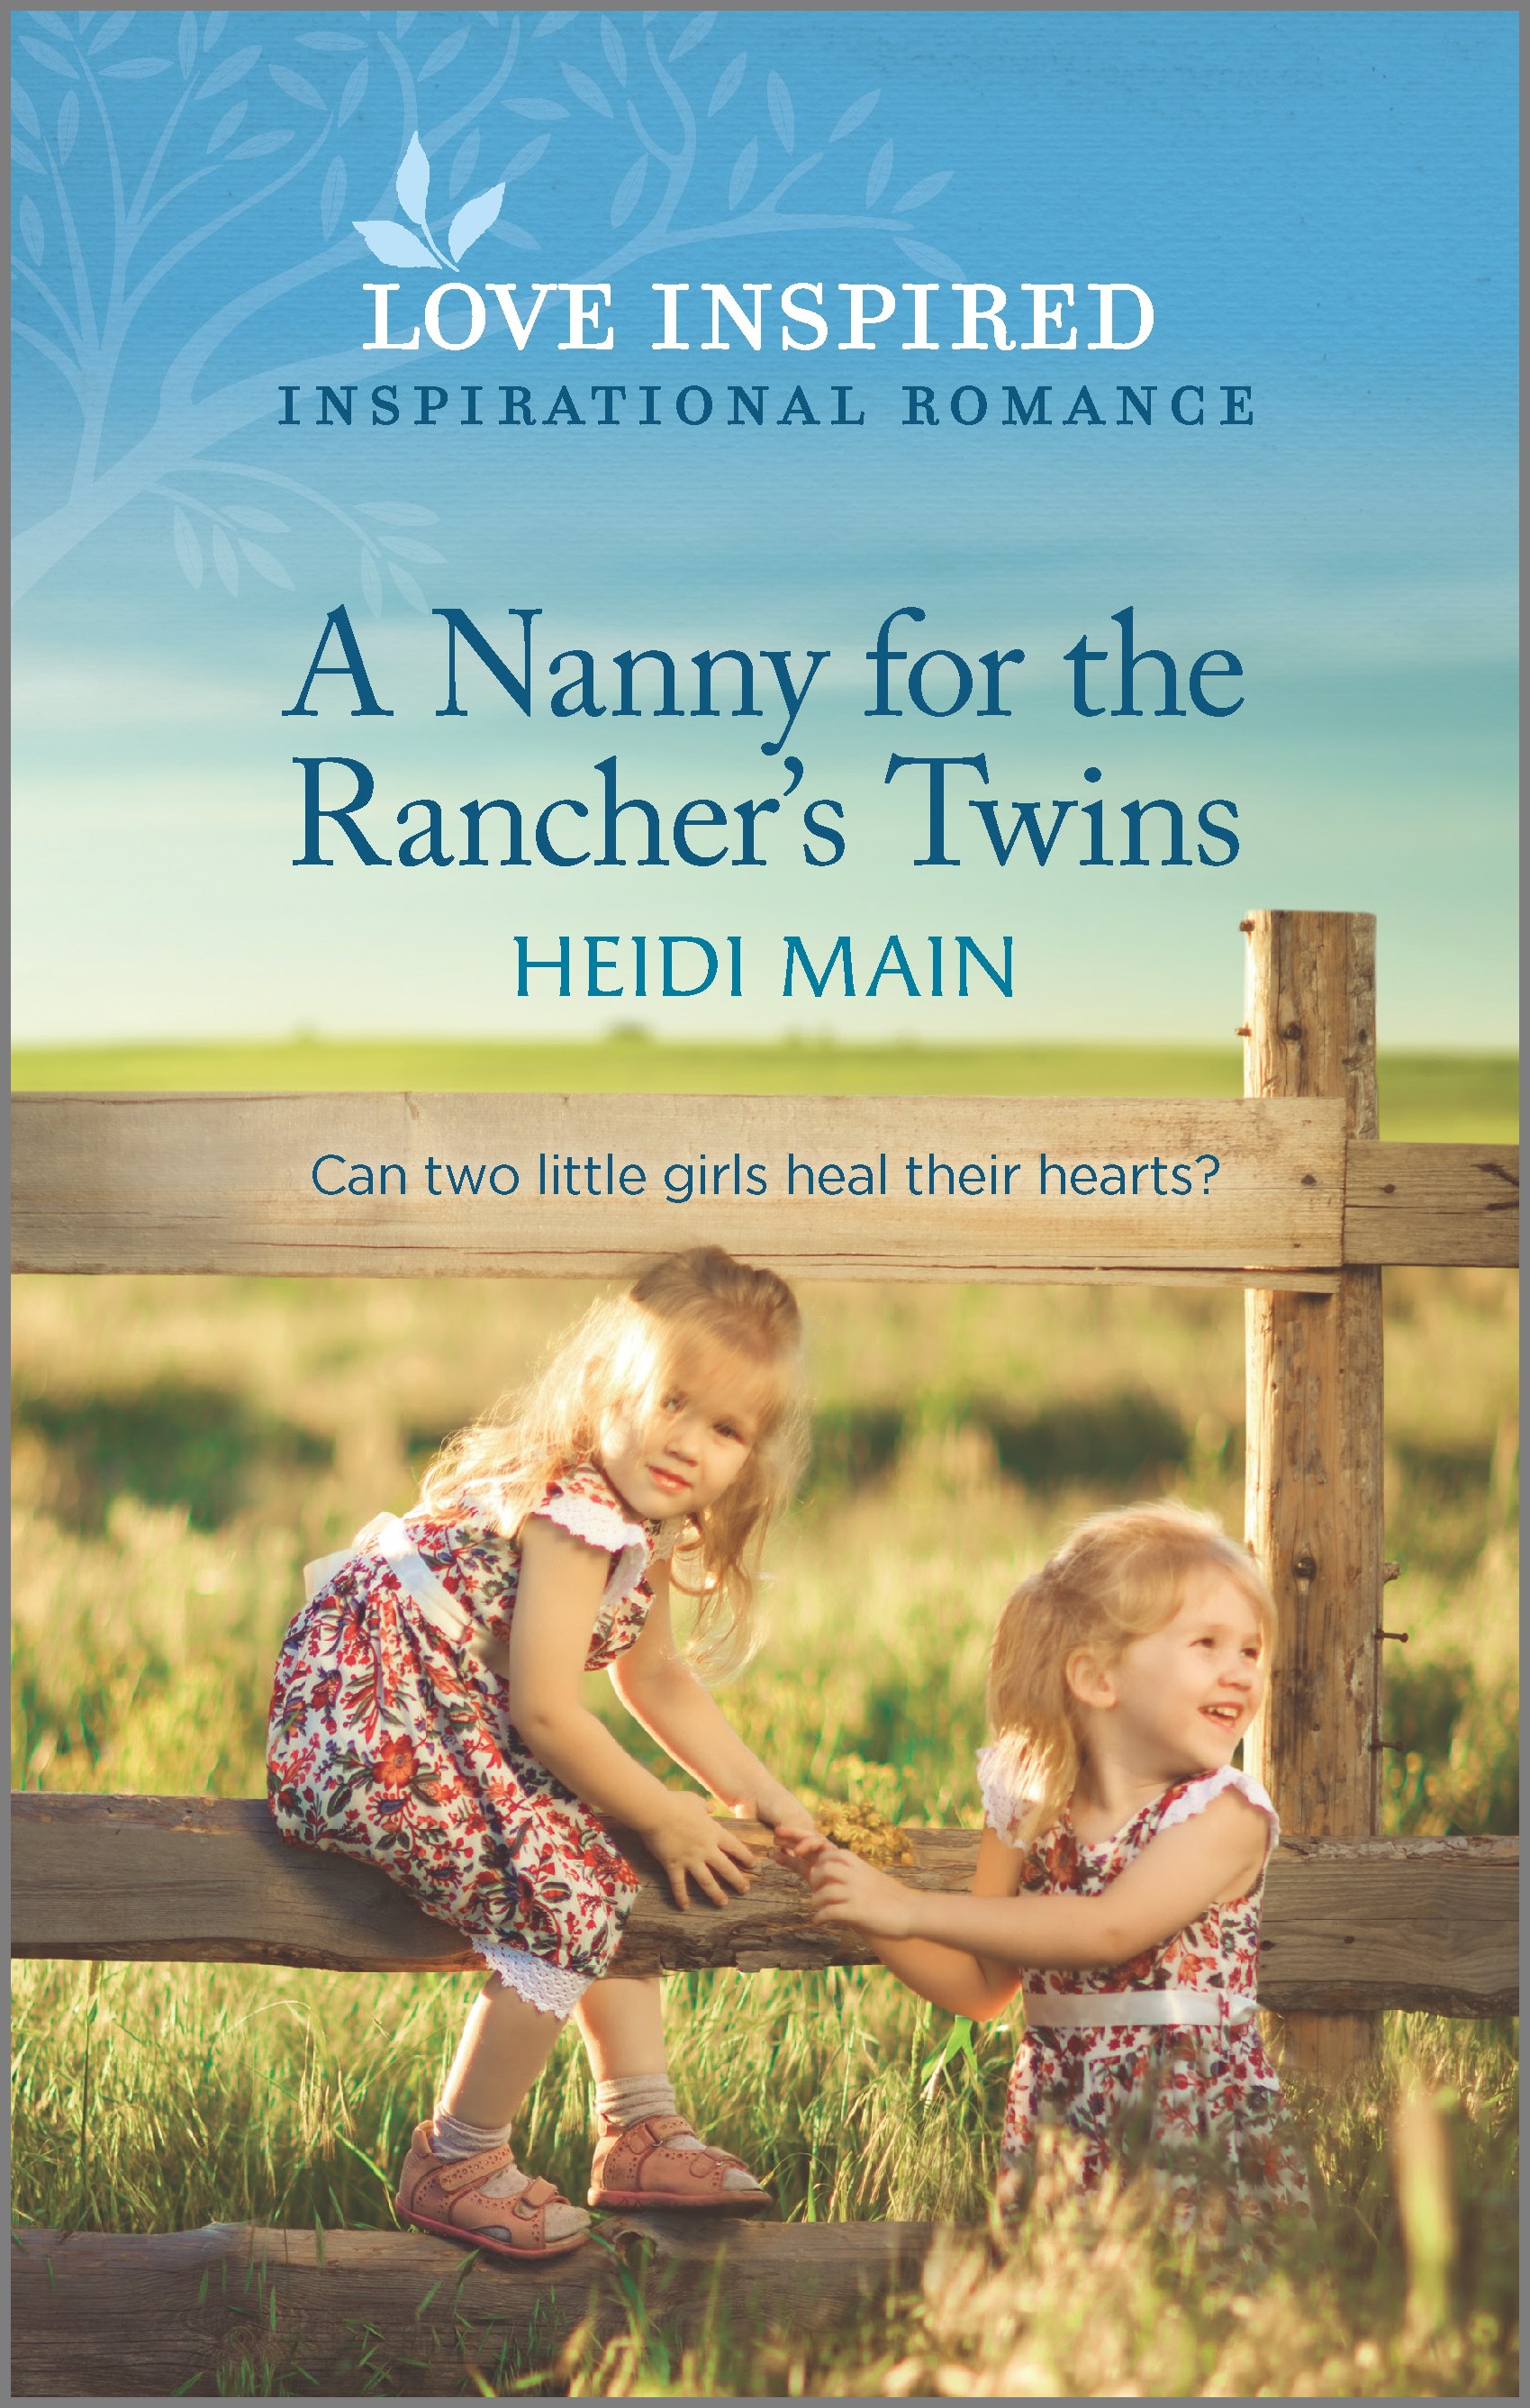 A NANNY FOR THE RANCHER'S TWINS by Heidi Main